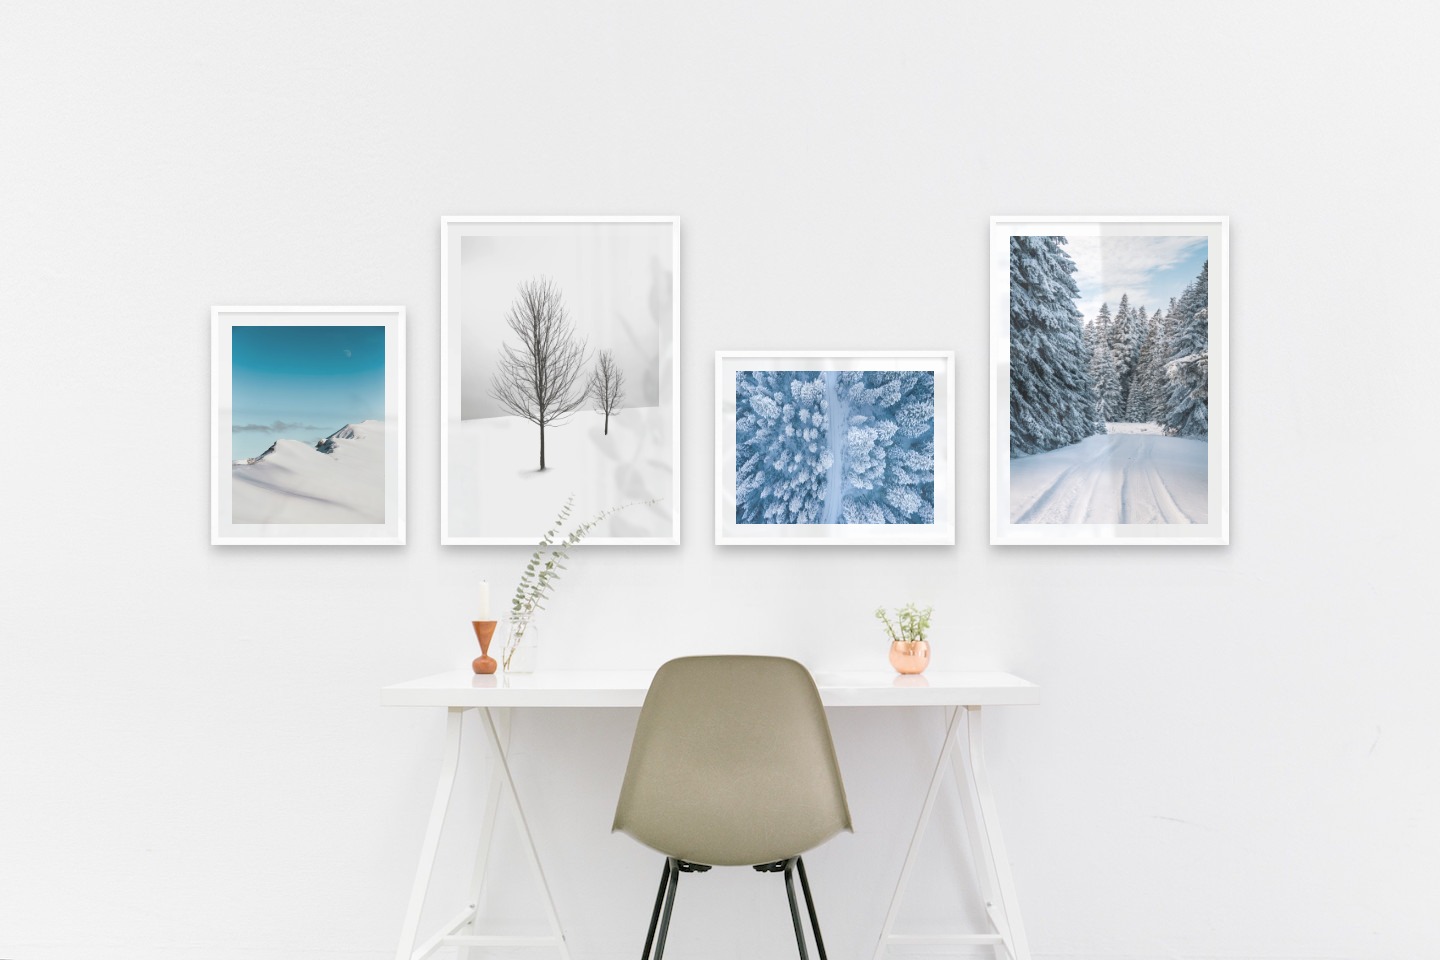 Gallery wall with picture frames in white in sizes 40x50 and 50x70 with prints "Snowy mountain peaks", "Trees in the snow", "Winter road from above" and "Snowy road"